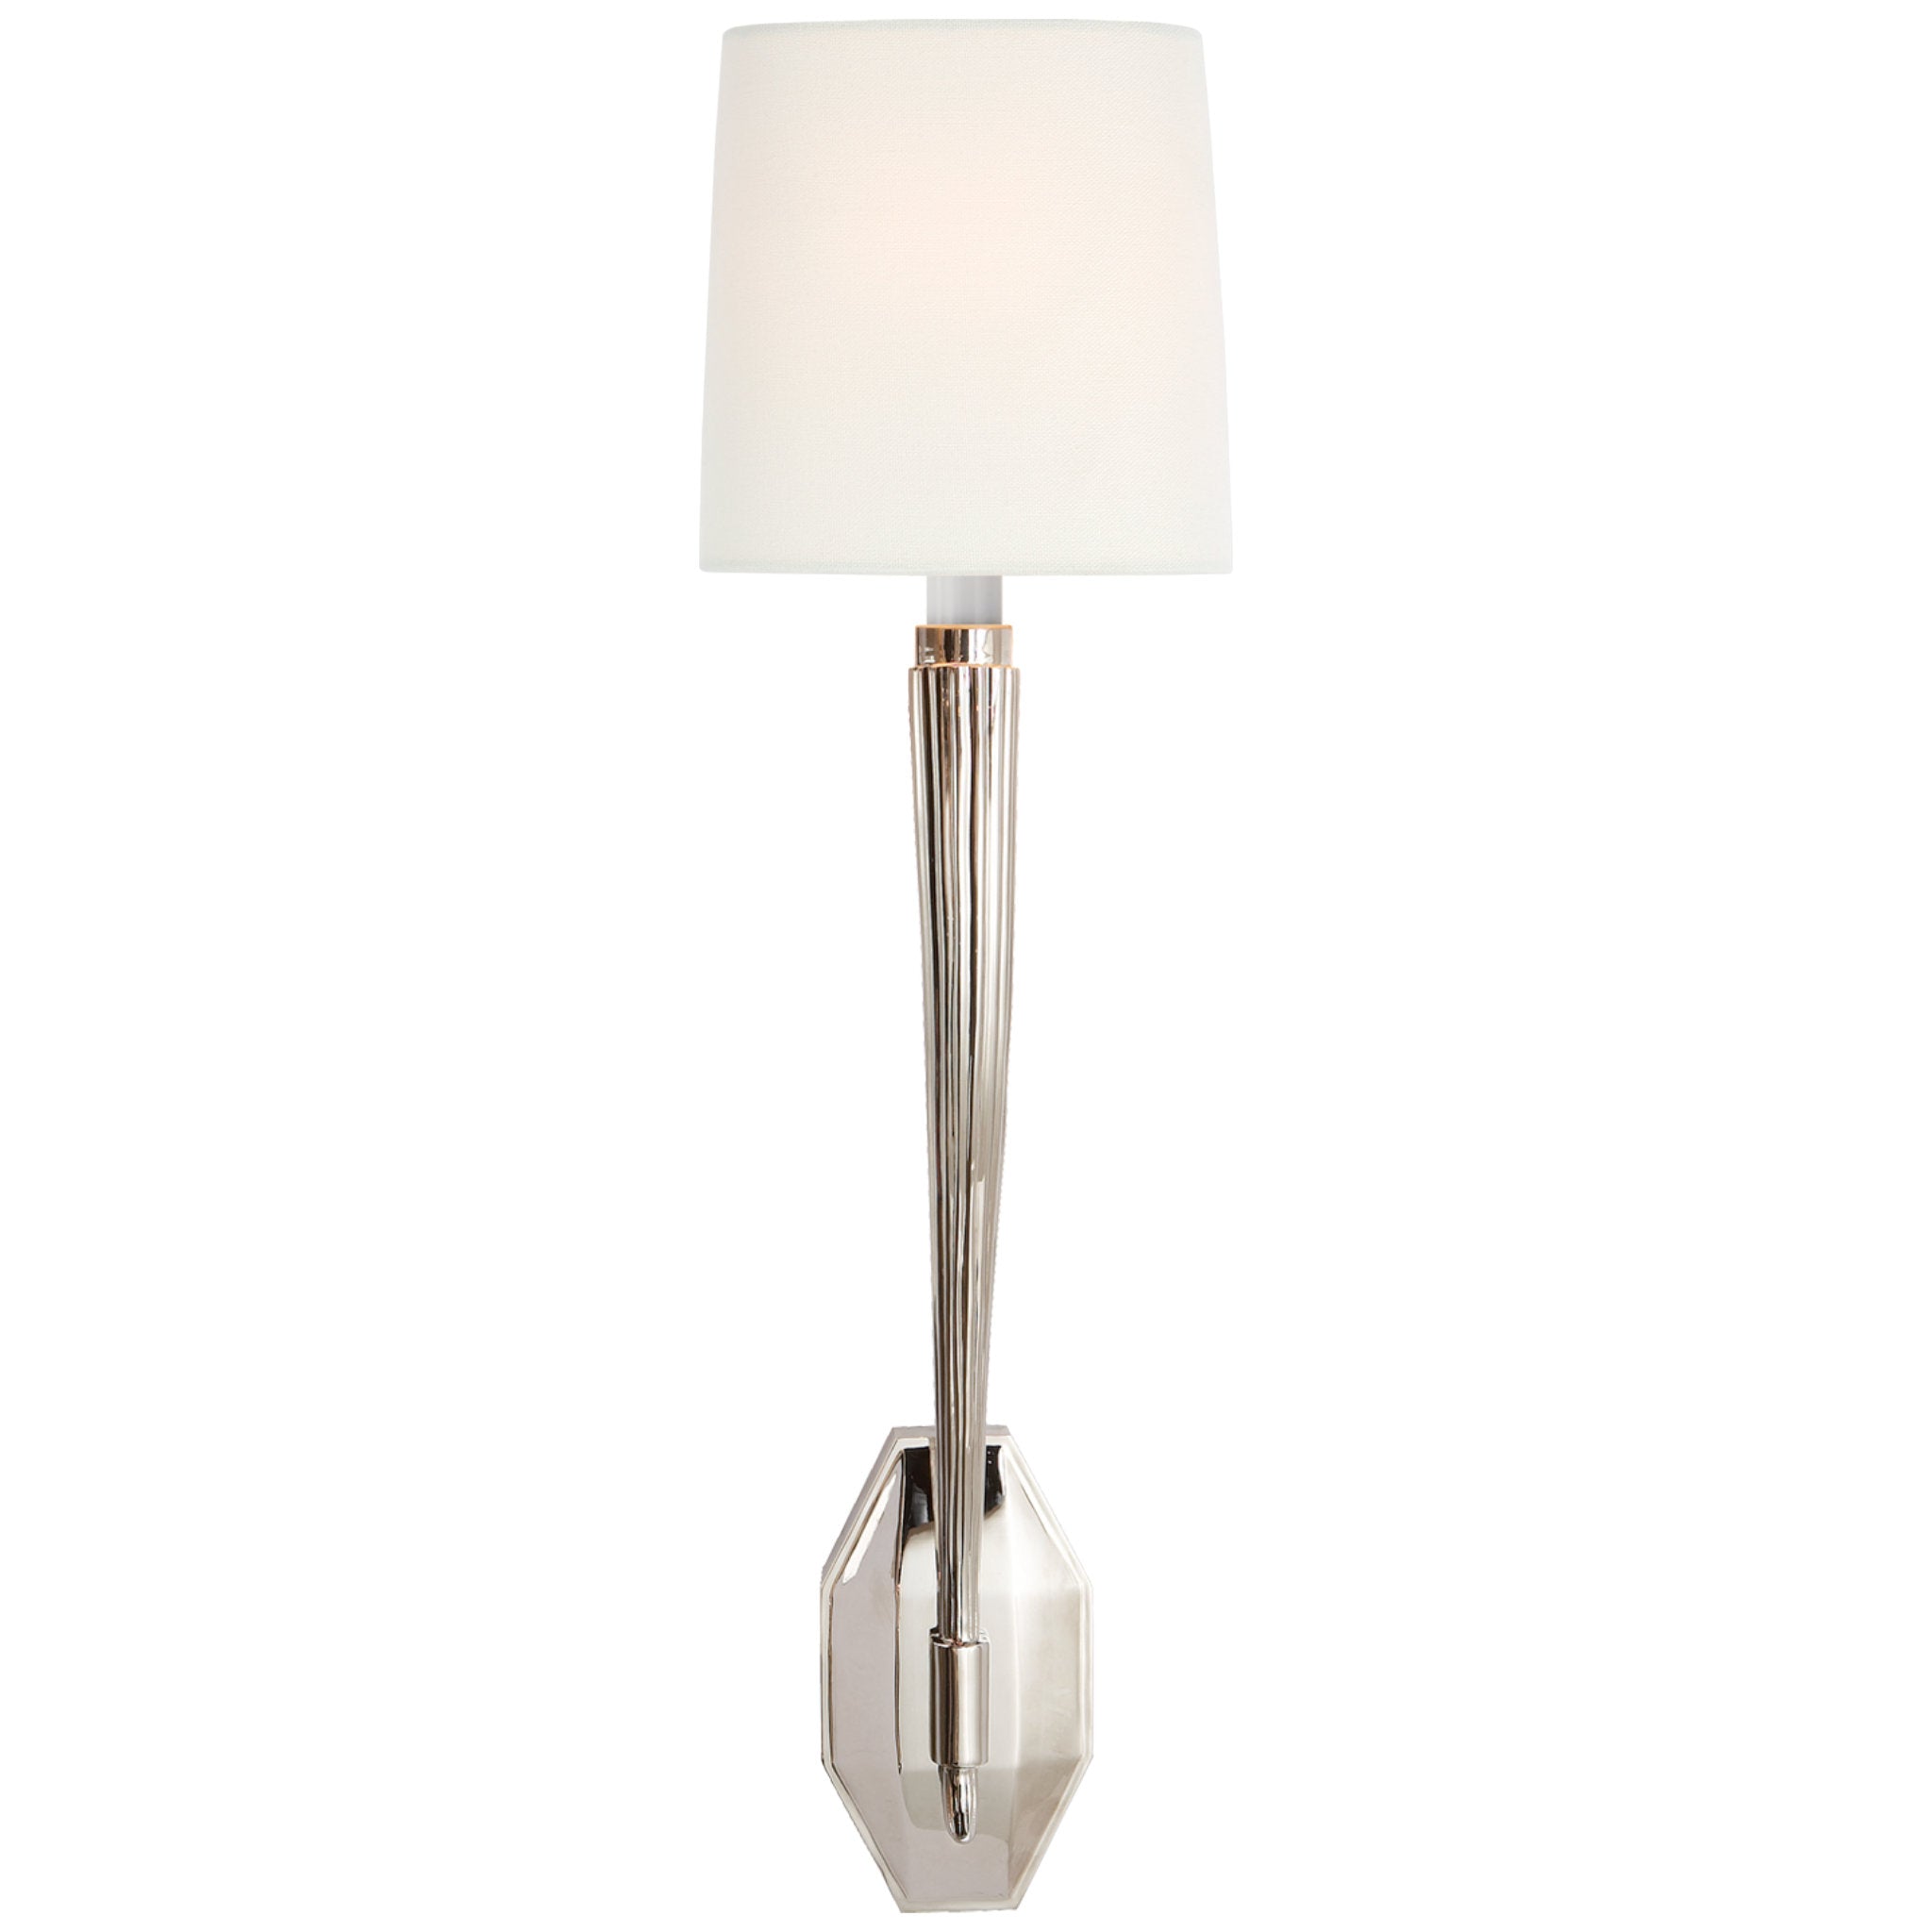 Chapman & Myers Ruhlmann Single Sconce in Polished Nickel with Linen Shade